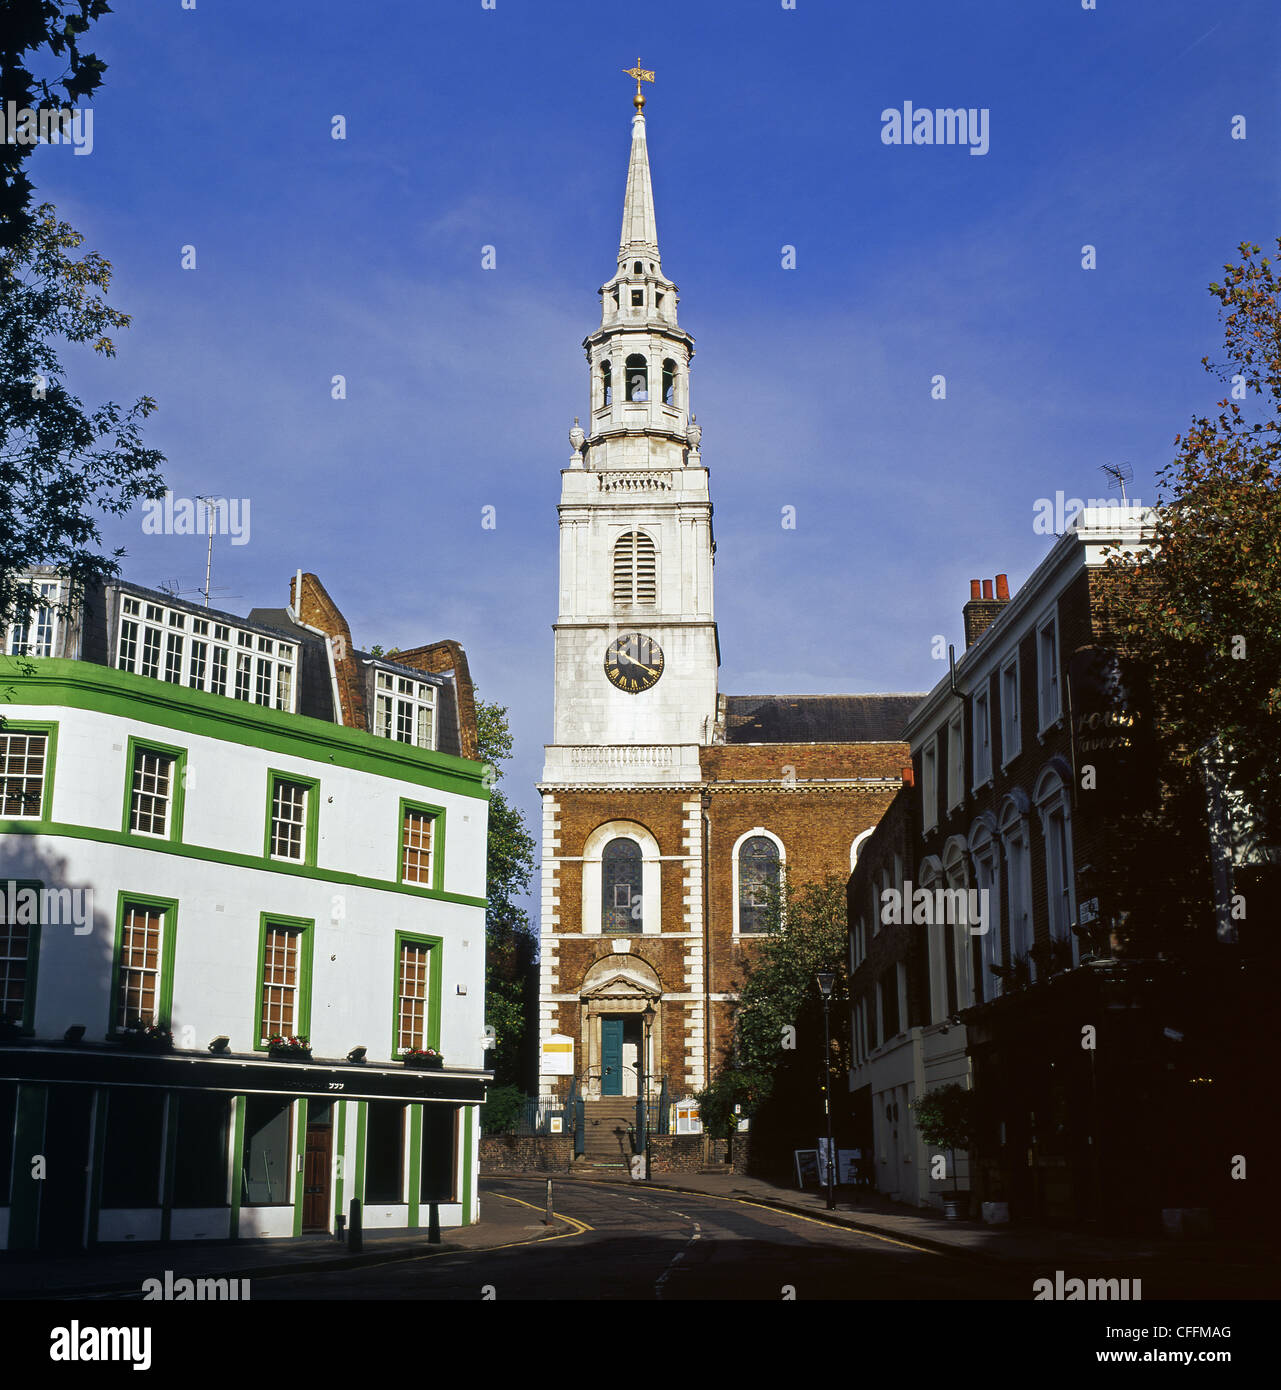 A view of St. James's Church with blue sky in Clerkenwell Green, Clerkenwell London EC1 England Great Britain  KATHY DEWITT Stock Photo